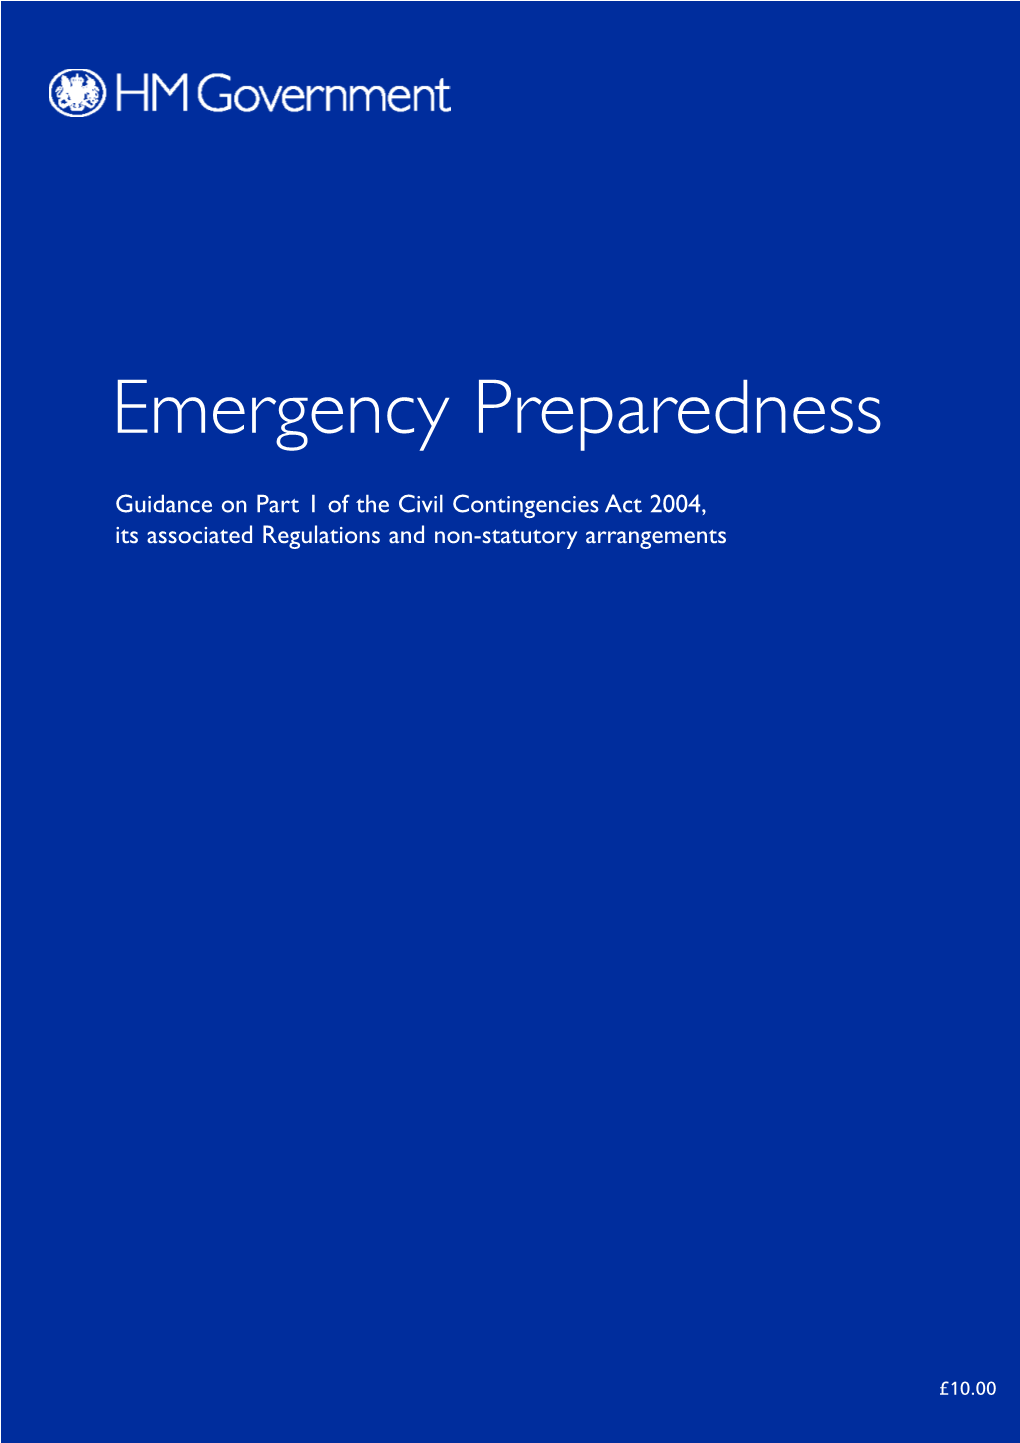 Guidance on Part 1 of the Civil Contingencies Act 2004, Its Associated Regulations and Non-Statutory Arrangements